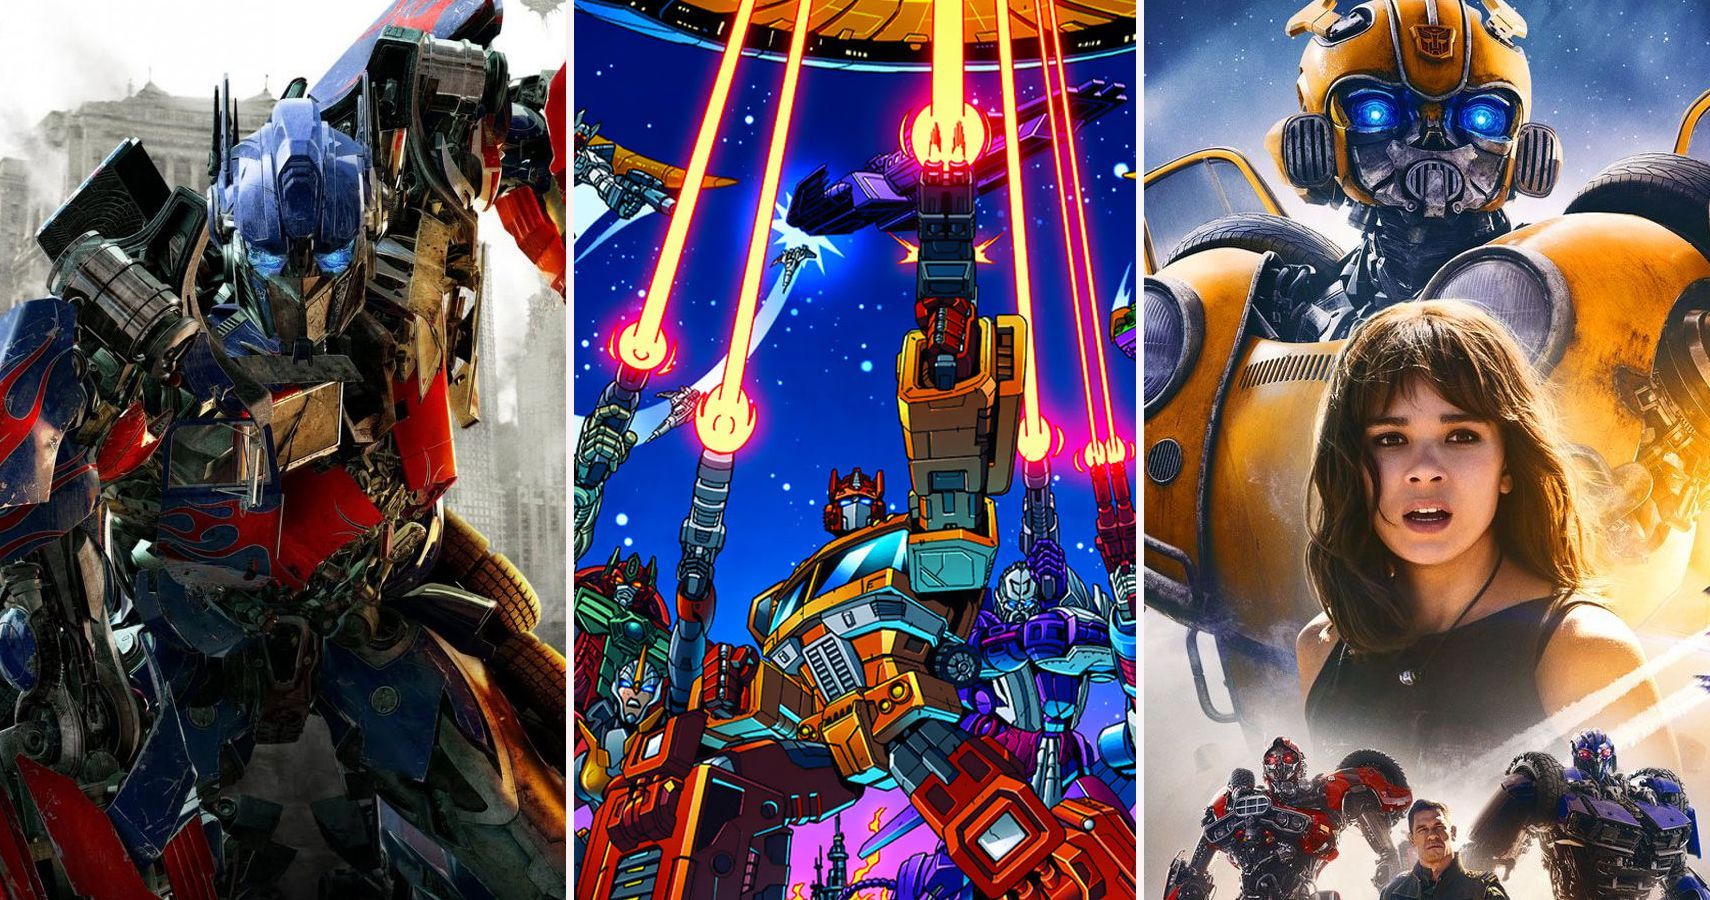 Transformers: Every Movie Poster, Ranked